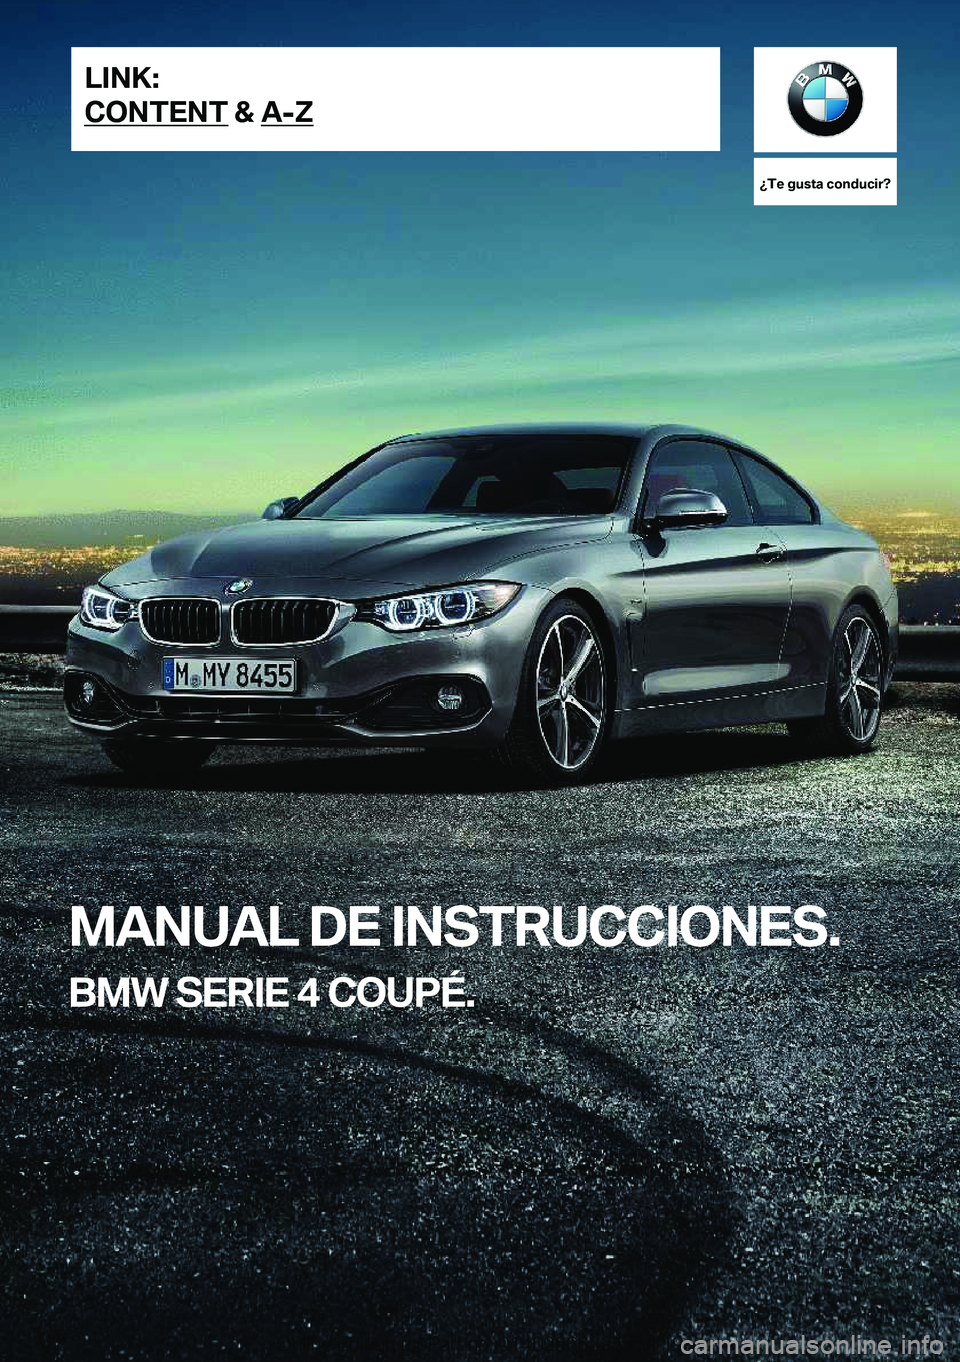 BMW 4 SERIES COUPE 2020  Manuales de Empleo (in Spanish) ��T�e��g�u�s�t�a��c�o�n�d�u�c�i�r� 
�M�A�N�U�A�L��D�E��I�N�S�T�R�U�C�C�I�O�N�E�S�.
�B�M�W��S�E�R�I�E��4��C�O�U�P�